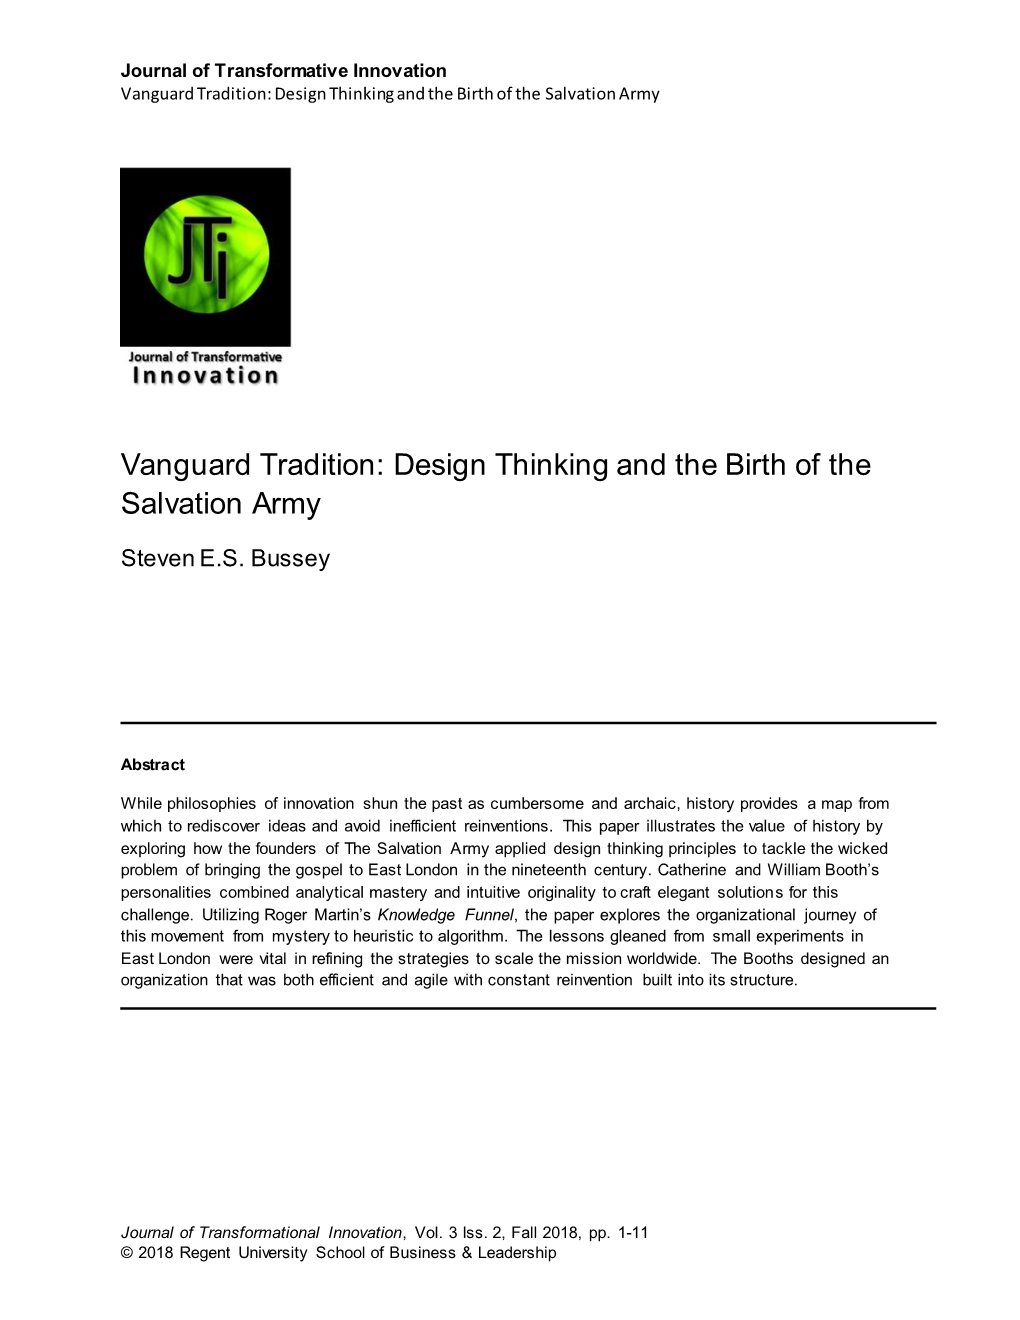 Vanguard Tradition: Design Thinking and the Birth of the Salvation Army